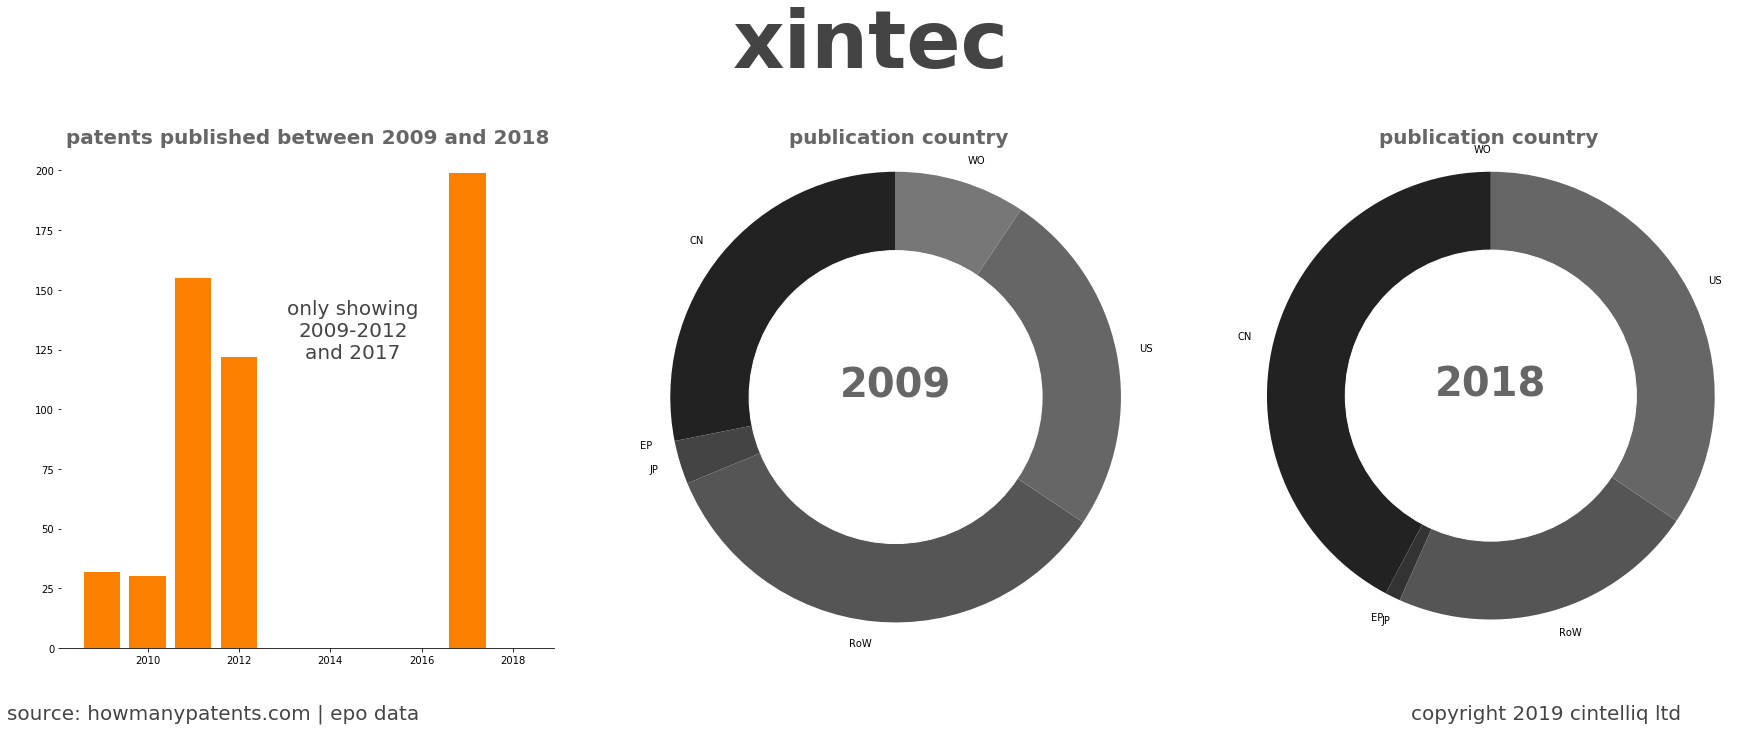 summary of patents for Xintec